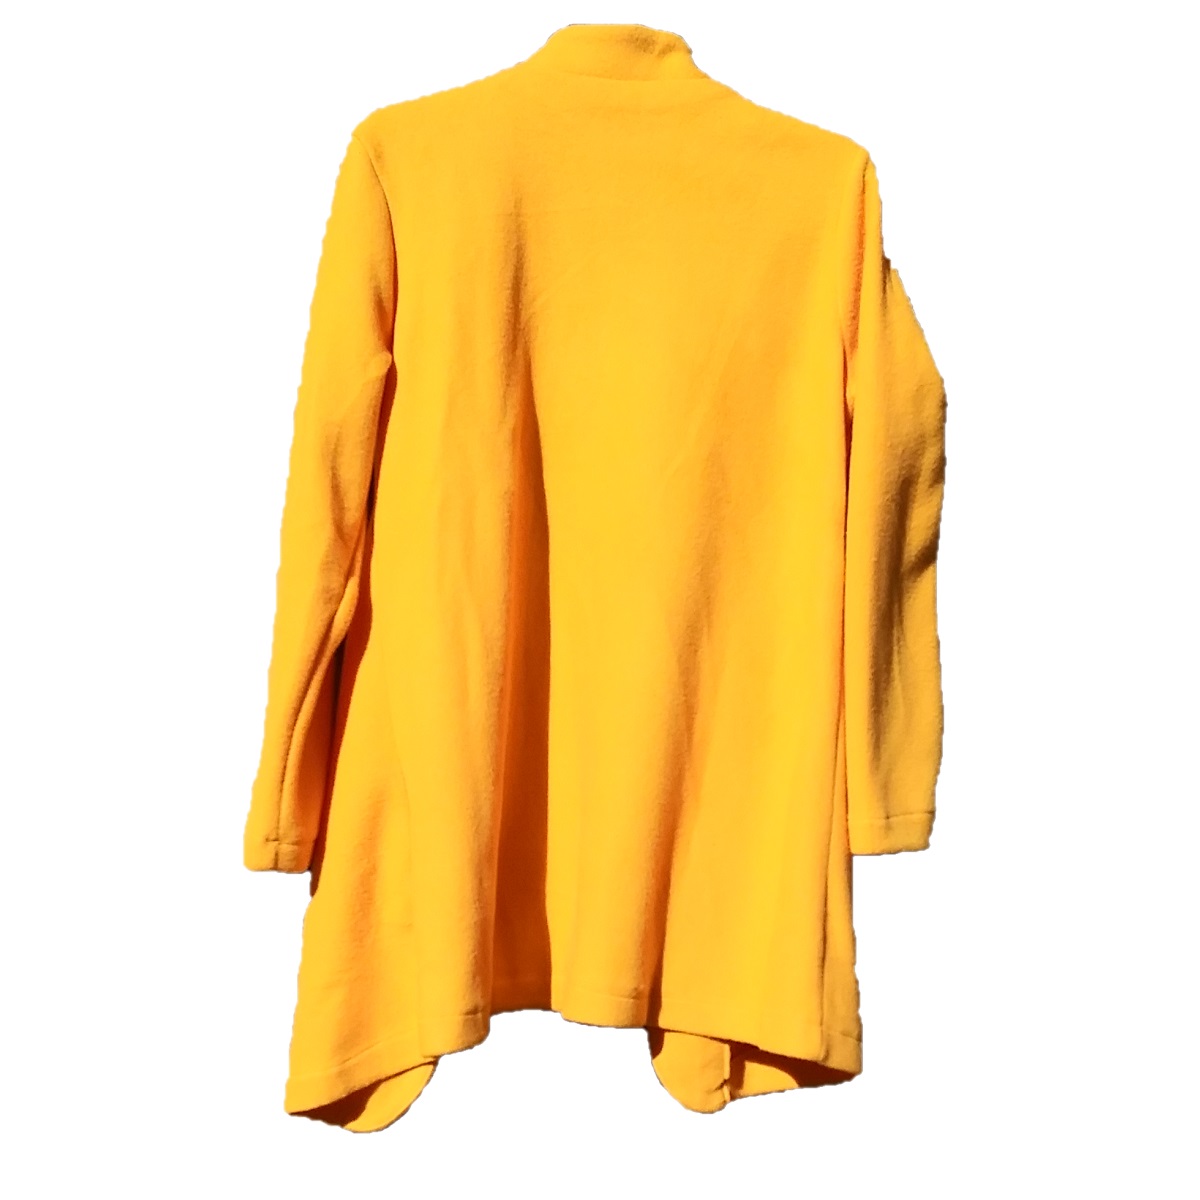 Women's Designer Coat Fashion Coat For an urban up and about town look. Mustard thigh length coat